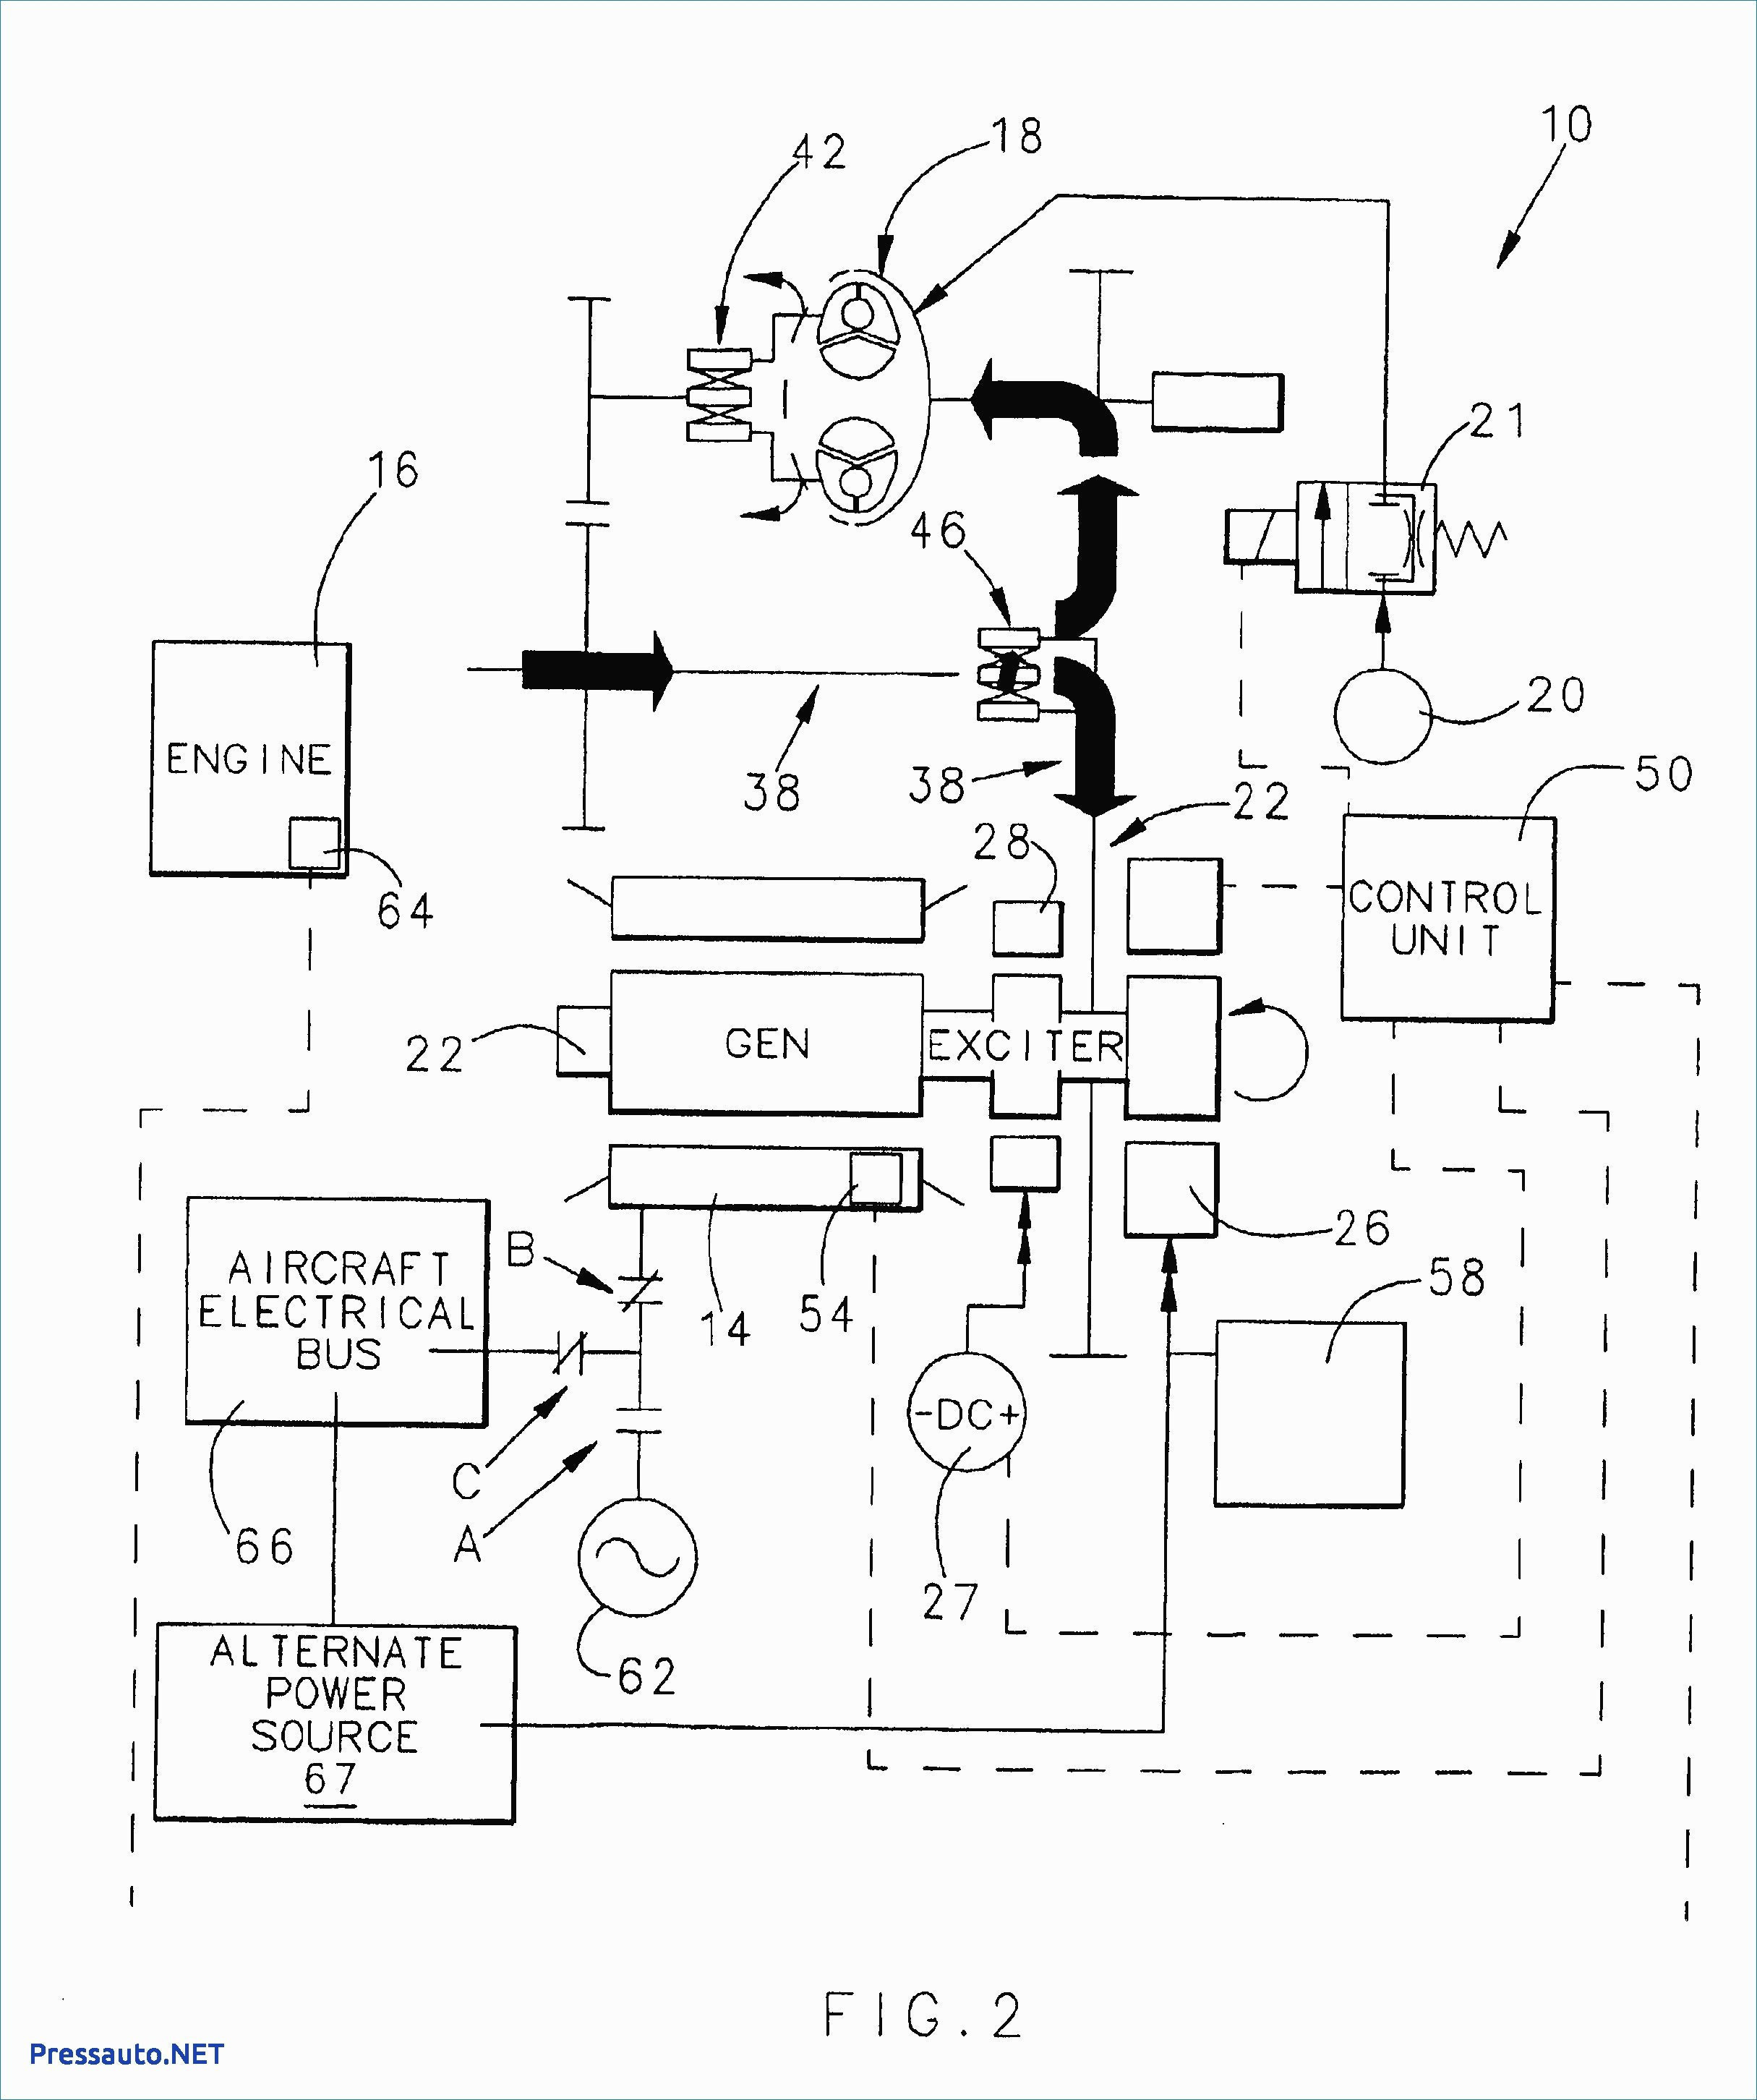 Tractor Alternator Wiring Diagram Reference Simple Alternator Wiring - Simple Alternator Wiring Diagram